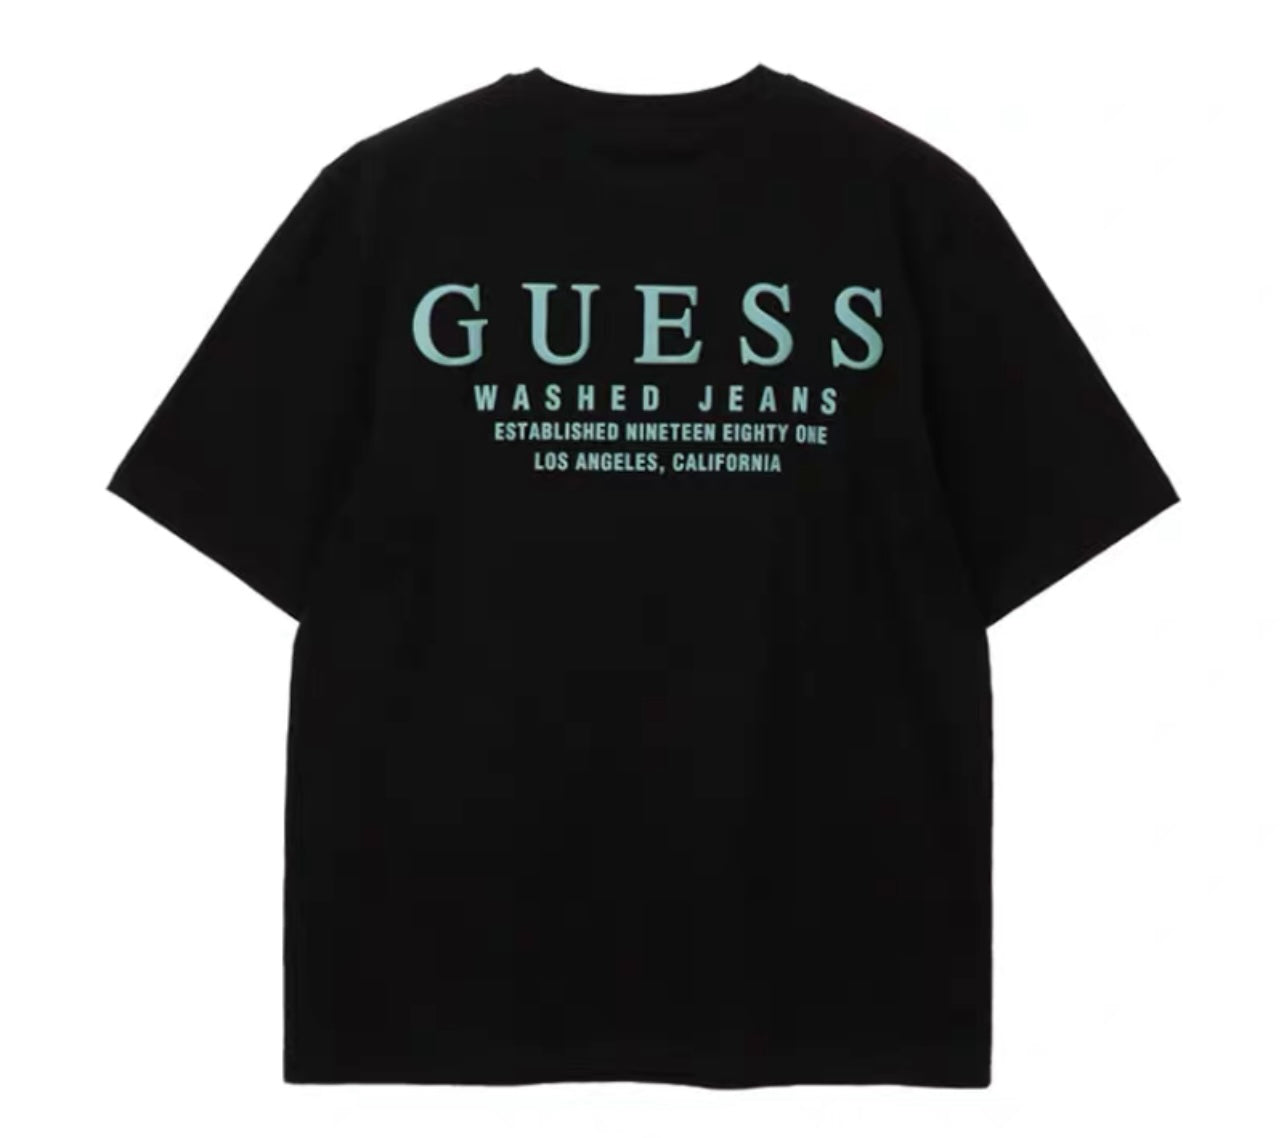 Guess Washed Jeans Black